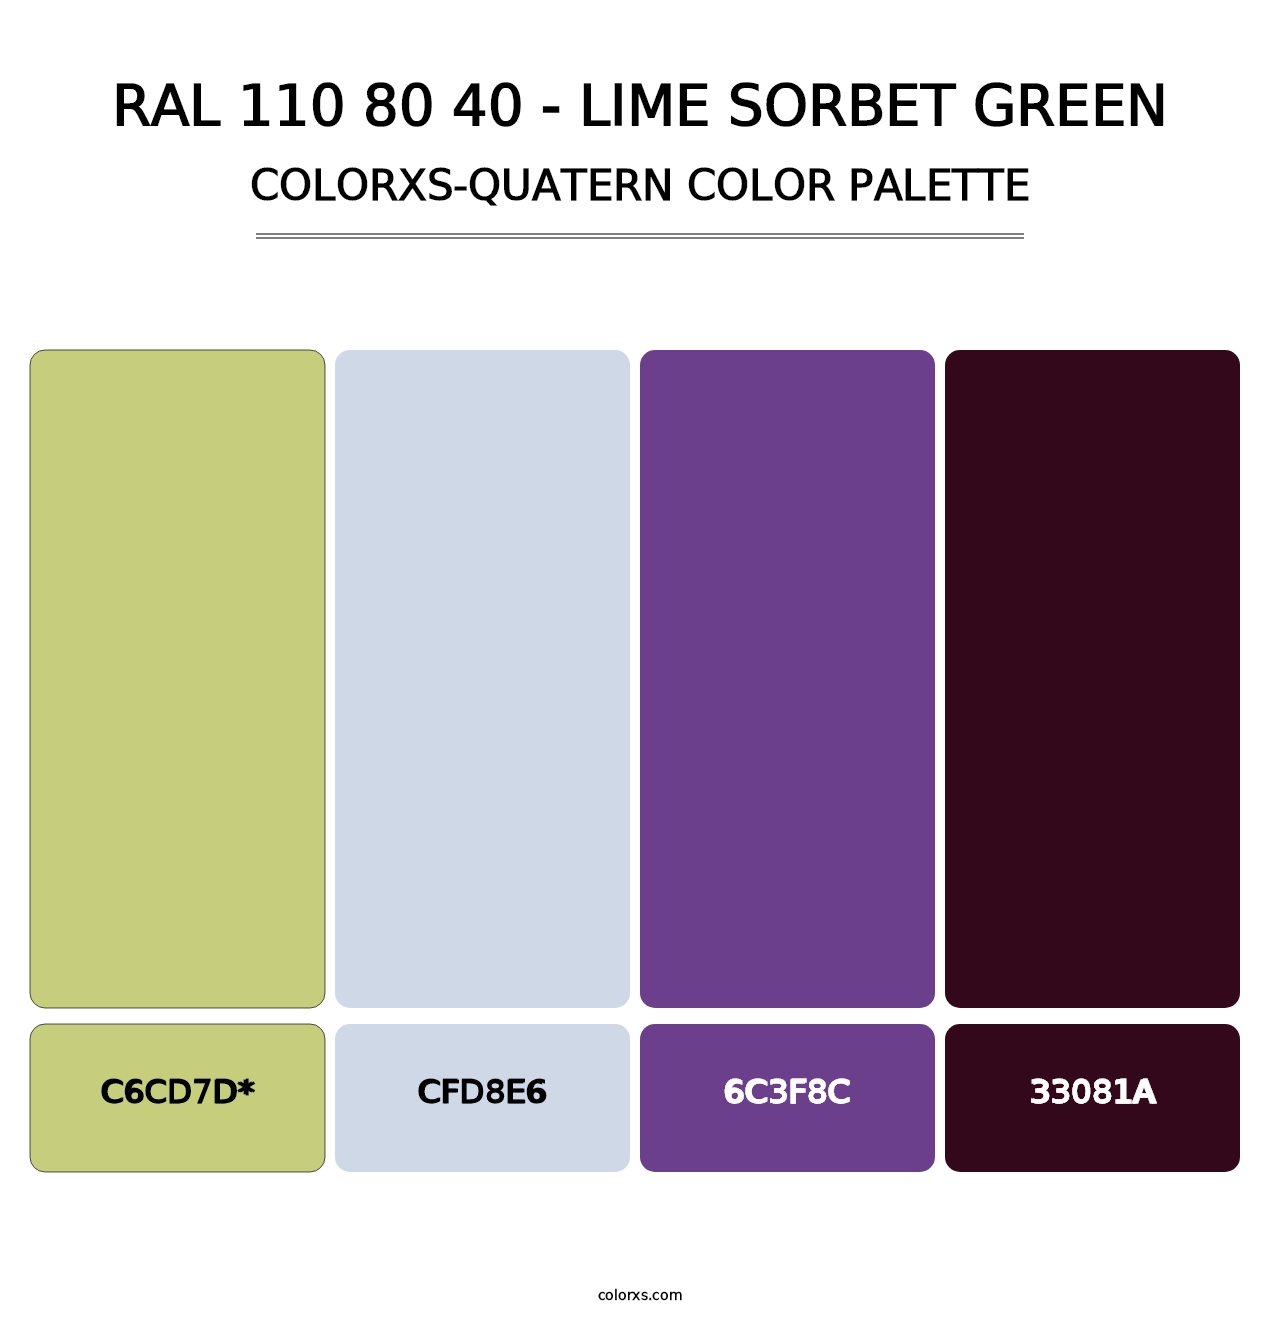 RAL 110 80 40 - Lime Sorbet Green - Colorxs Quatern Palette